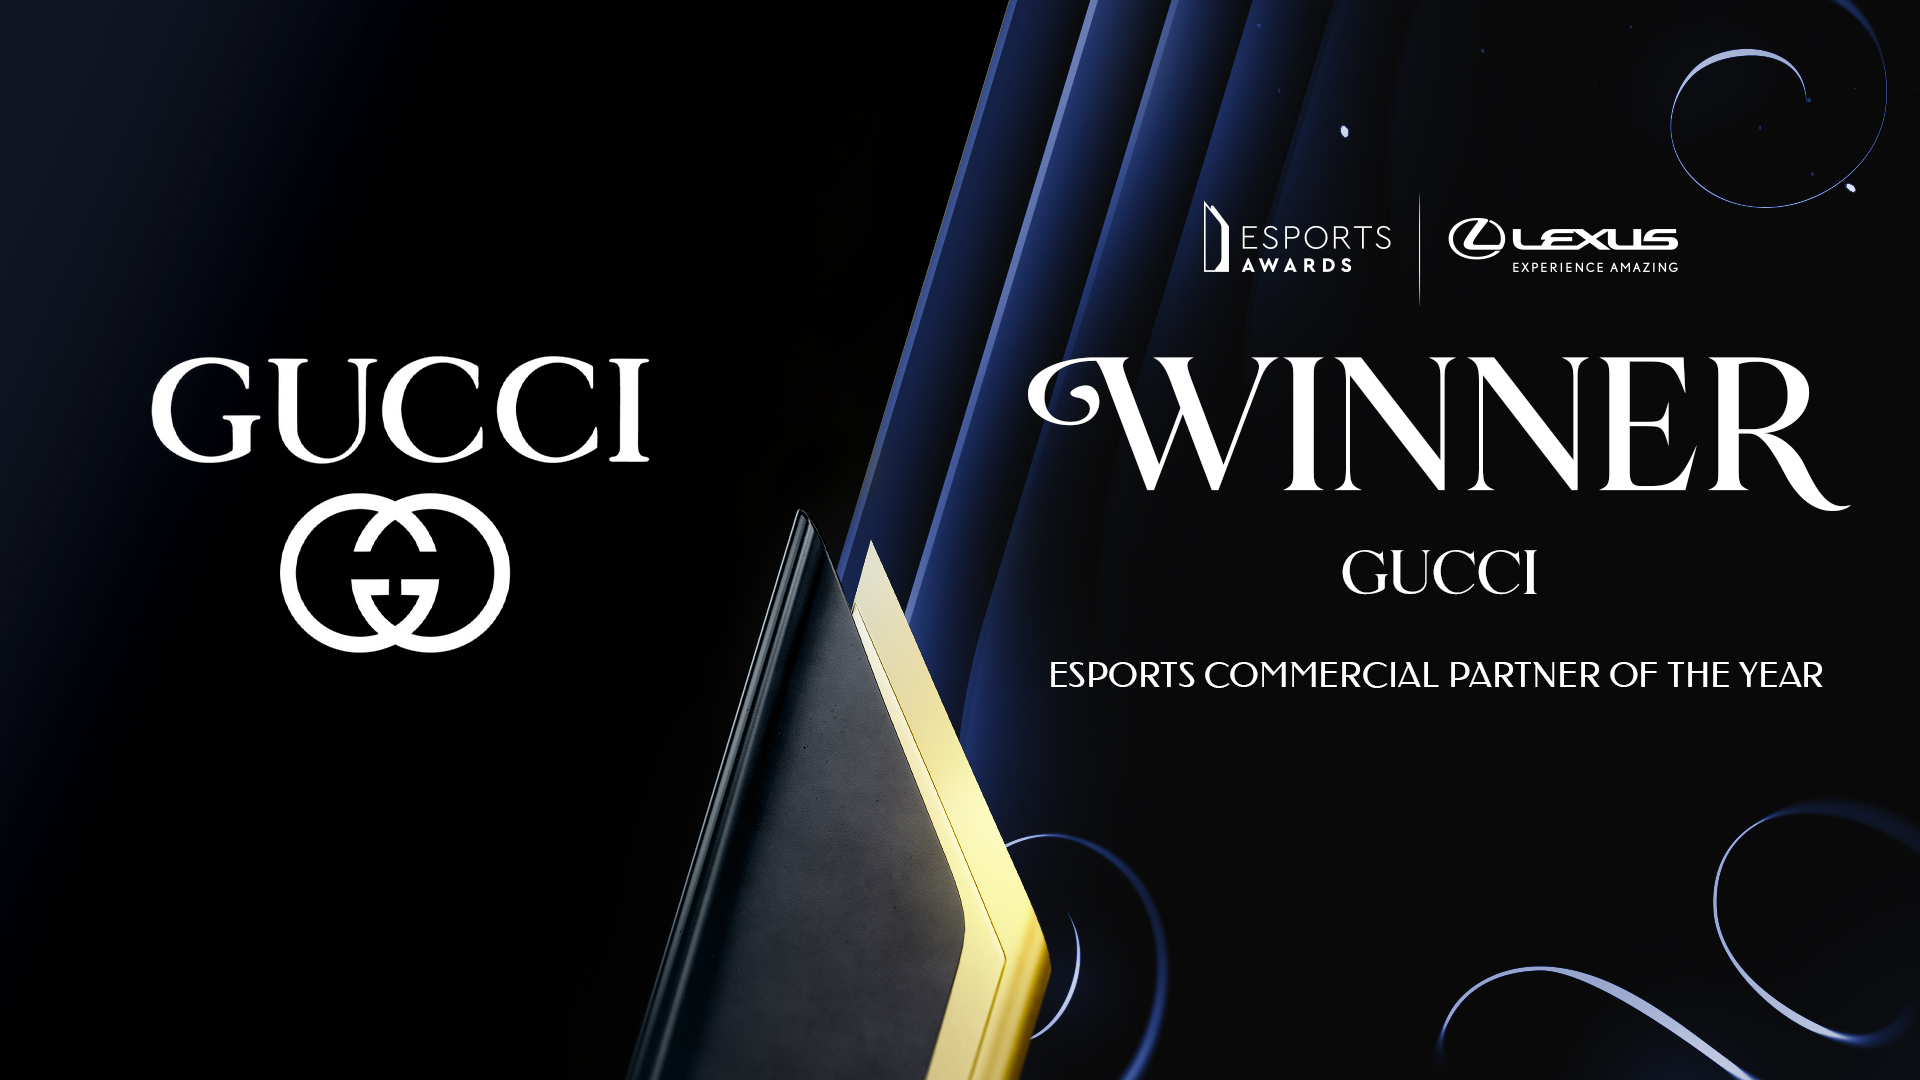 Esports Commercial Partner of the Year: Gucci